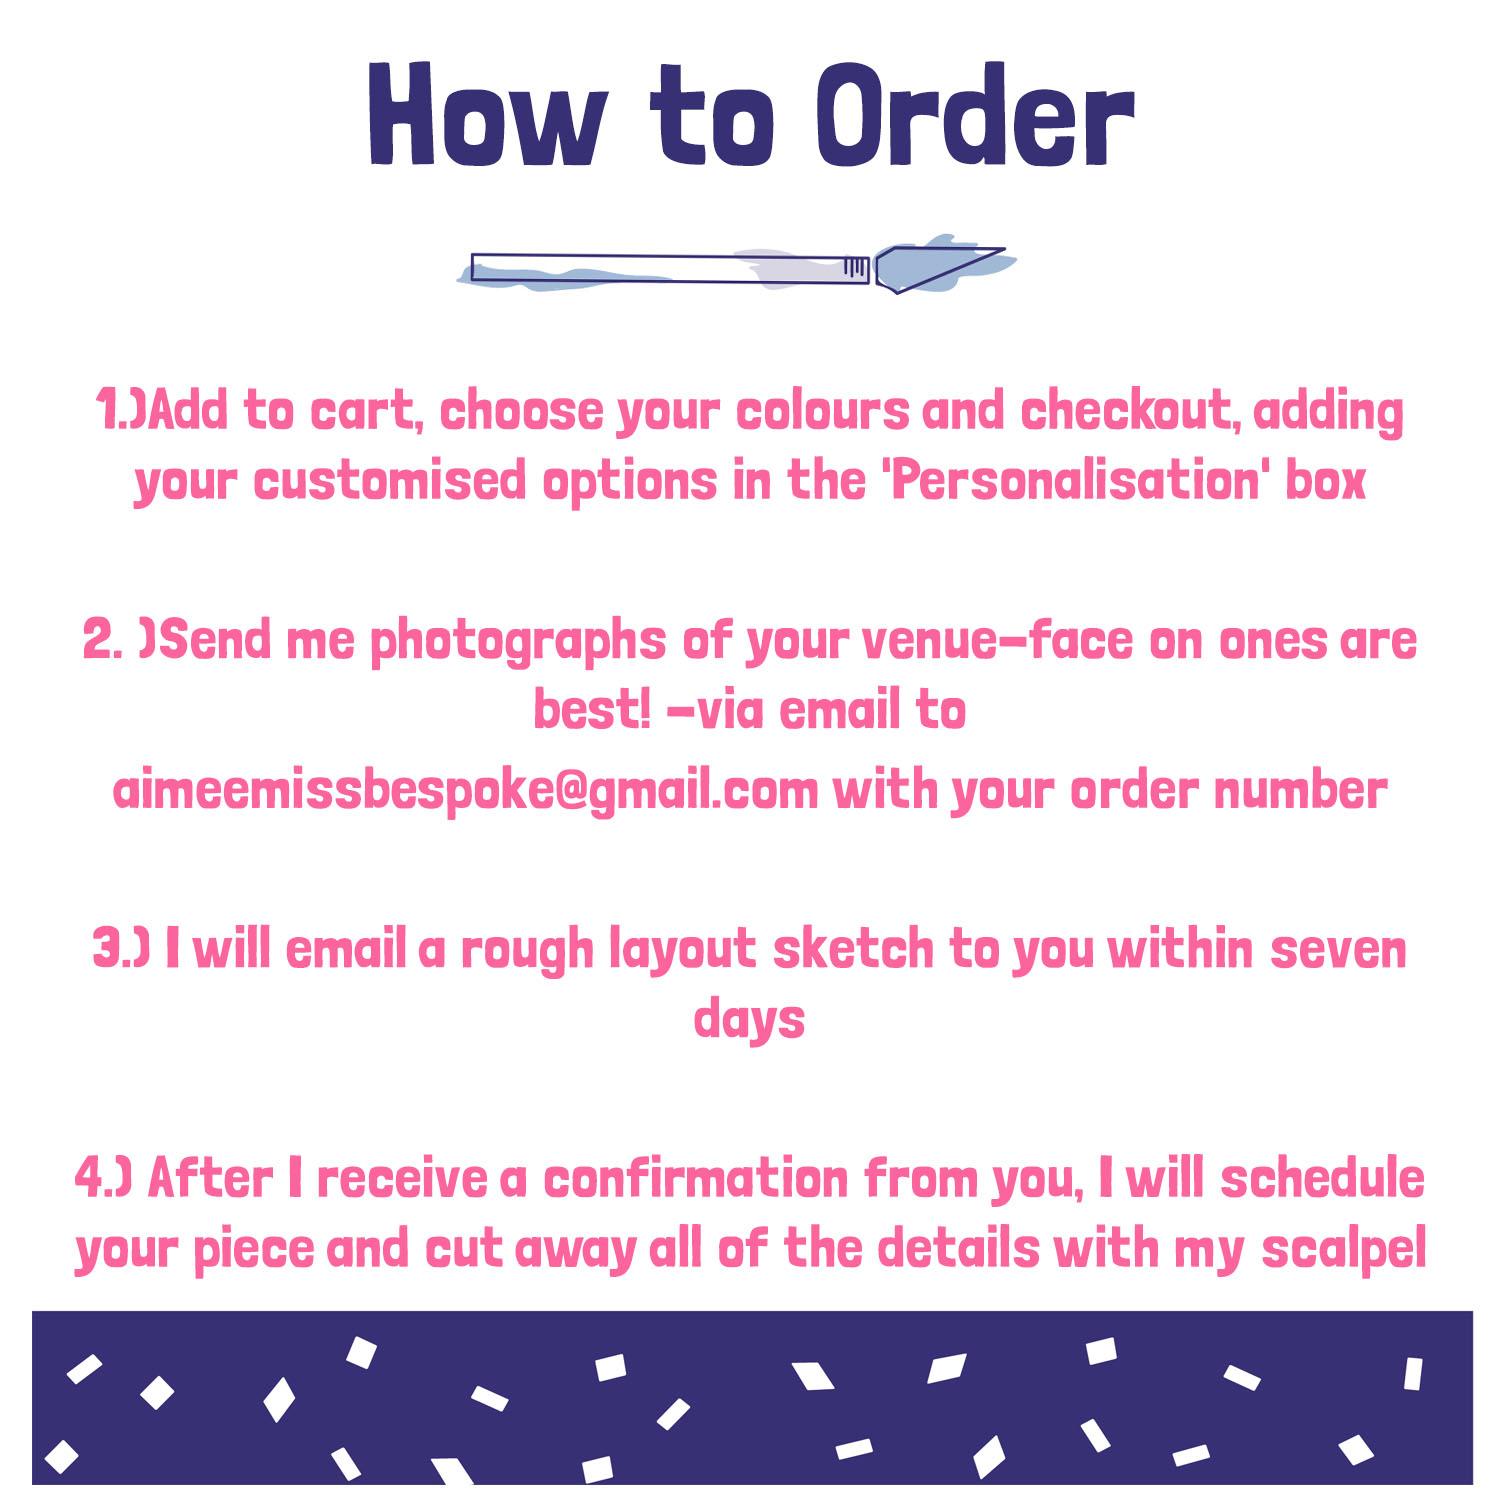 Graphic of Ordering Instructions